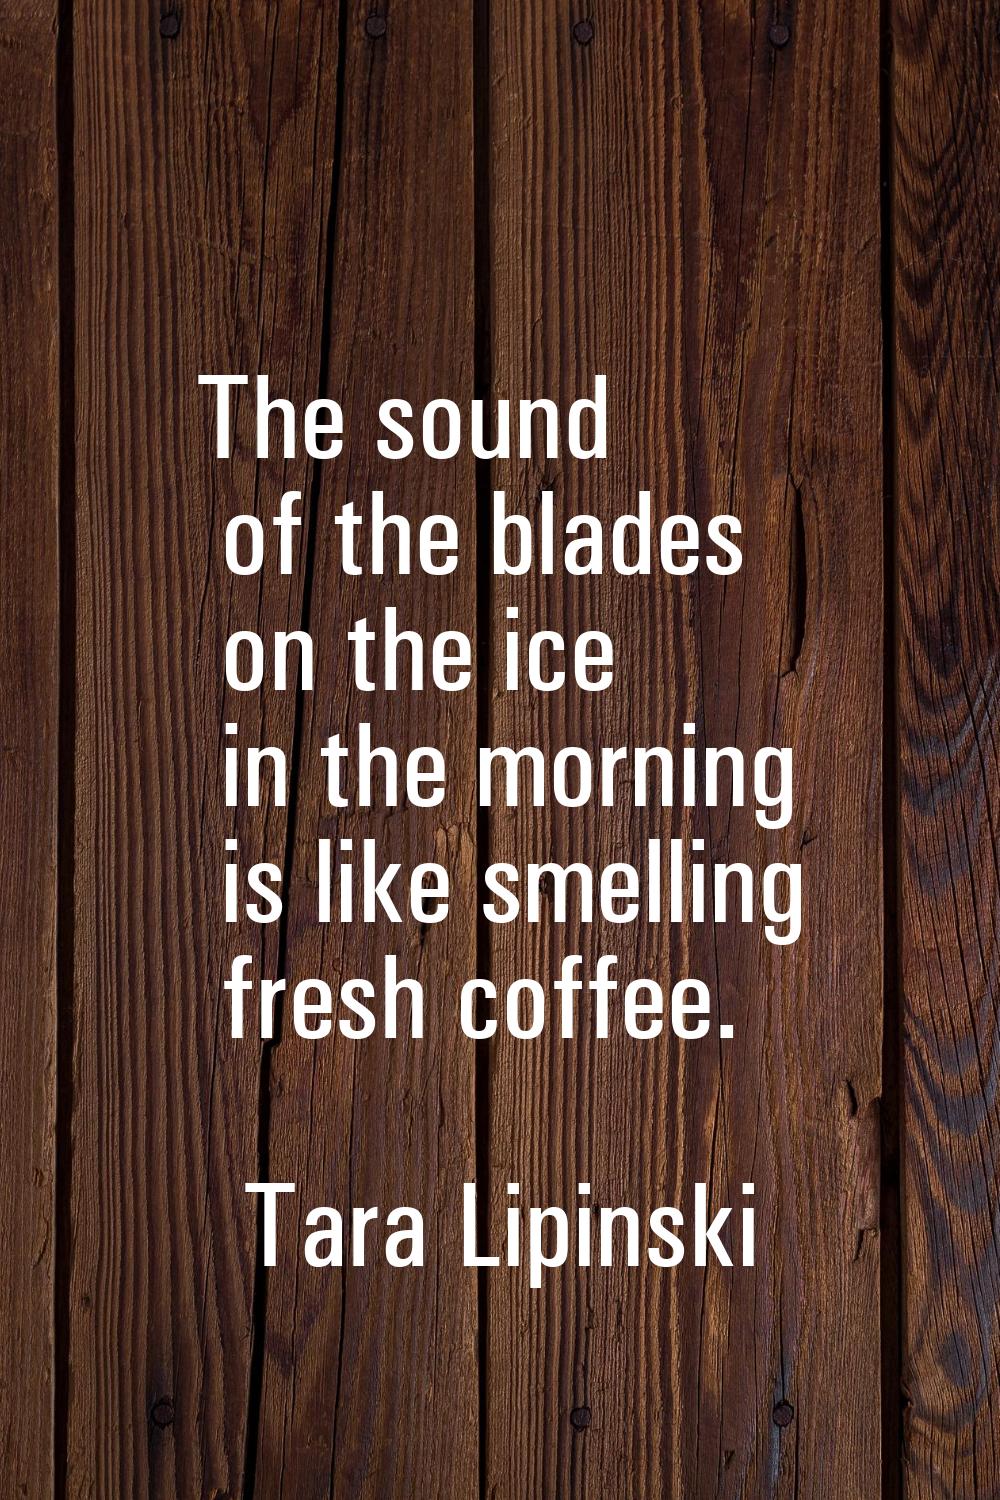 The sound of the blades on the ice in the morning is like smelling fresh coffee.